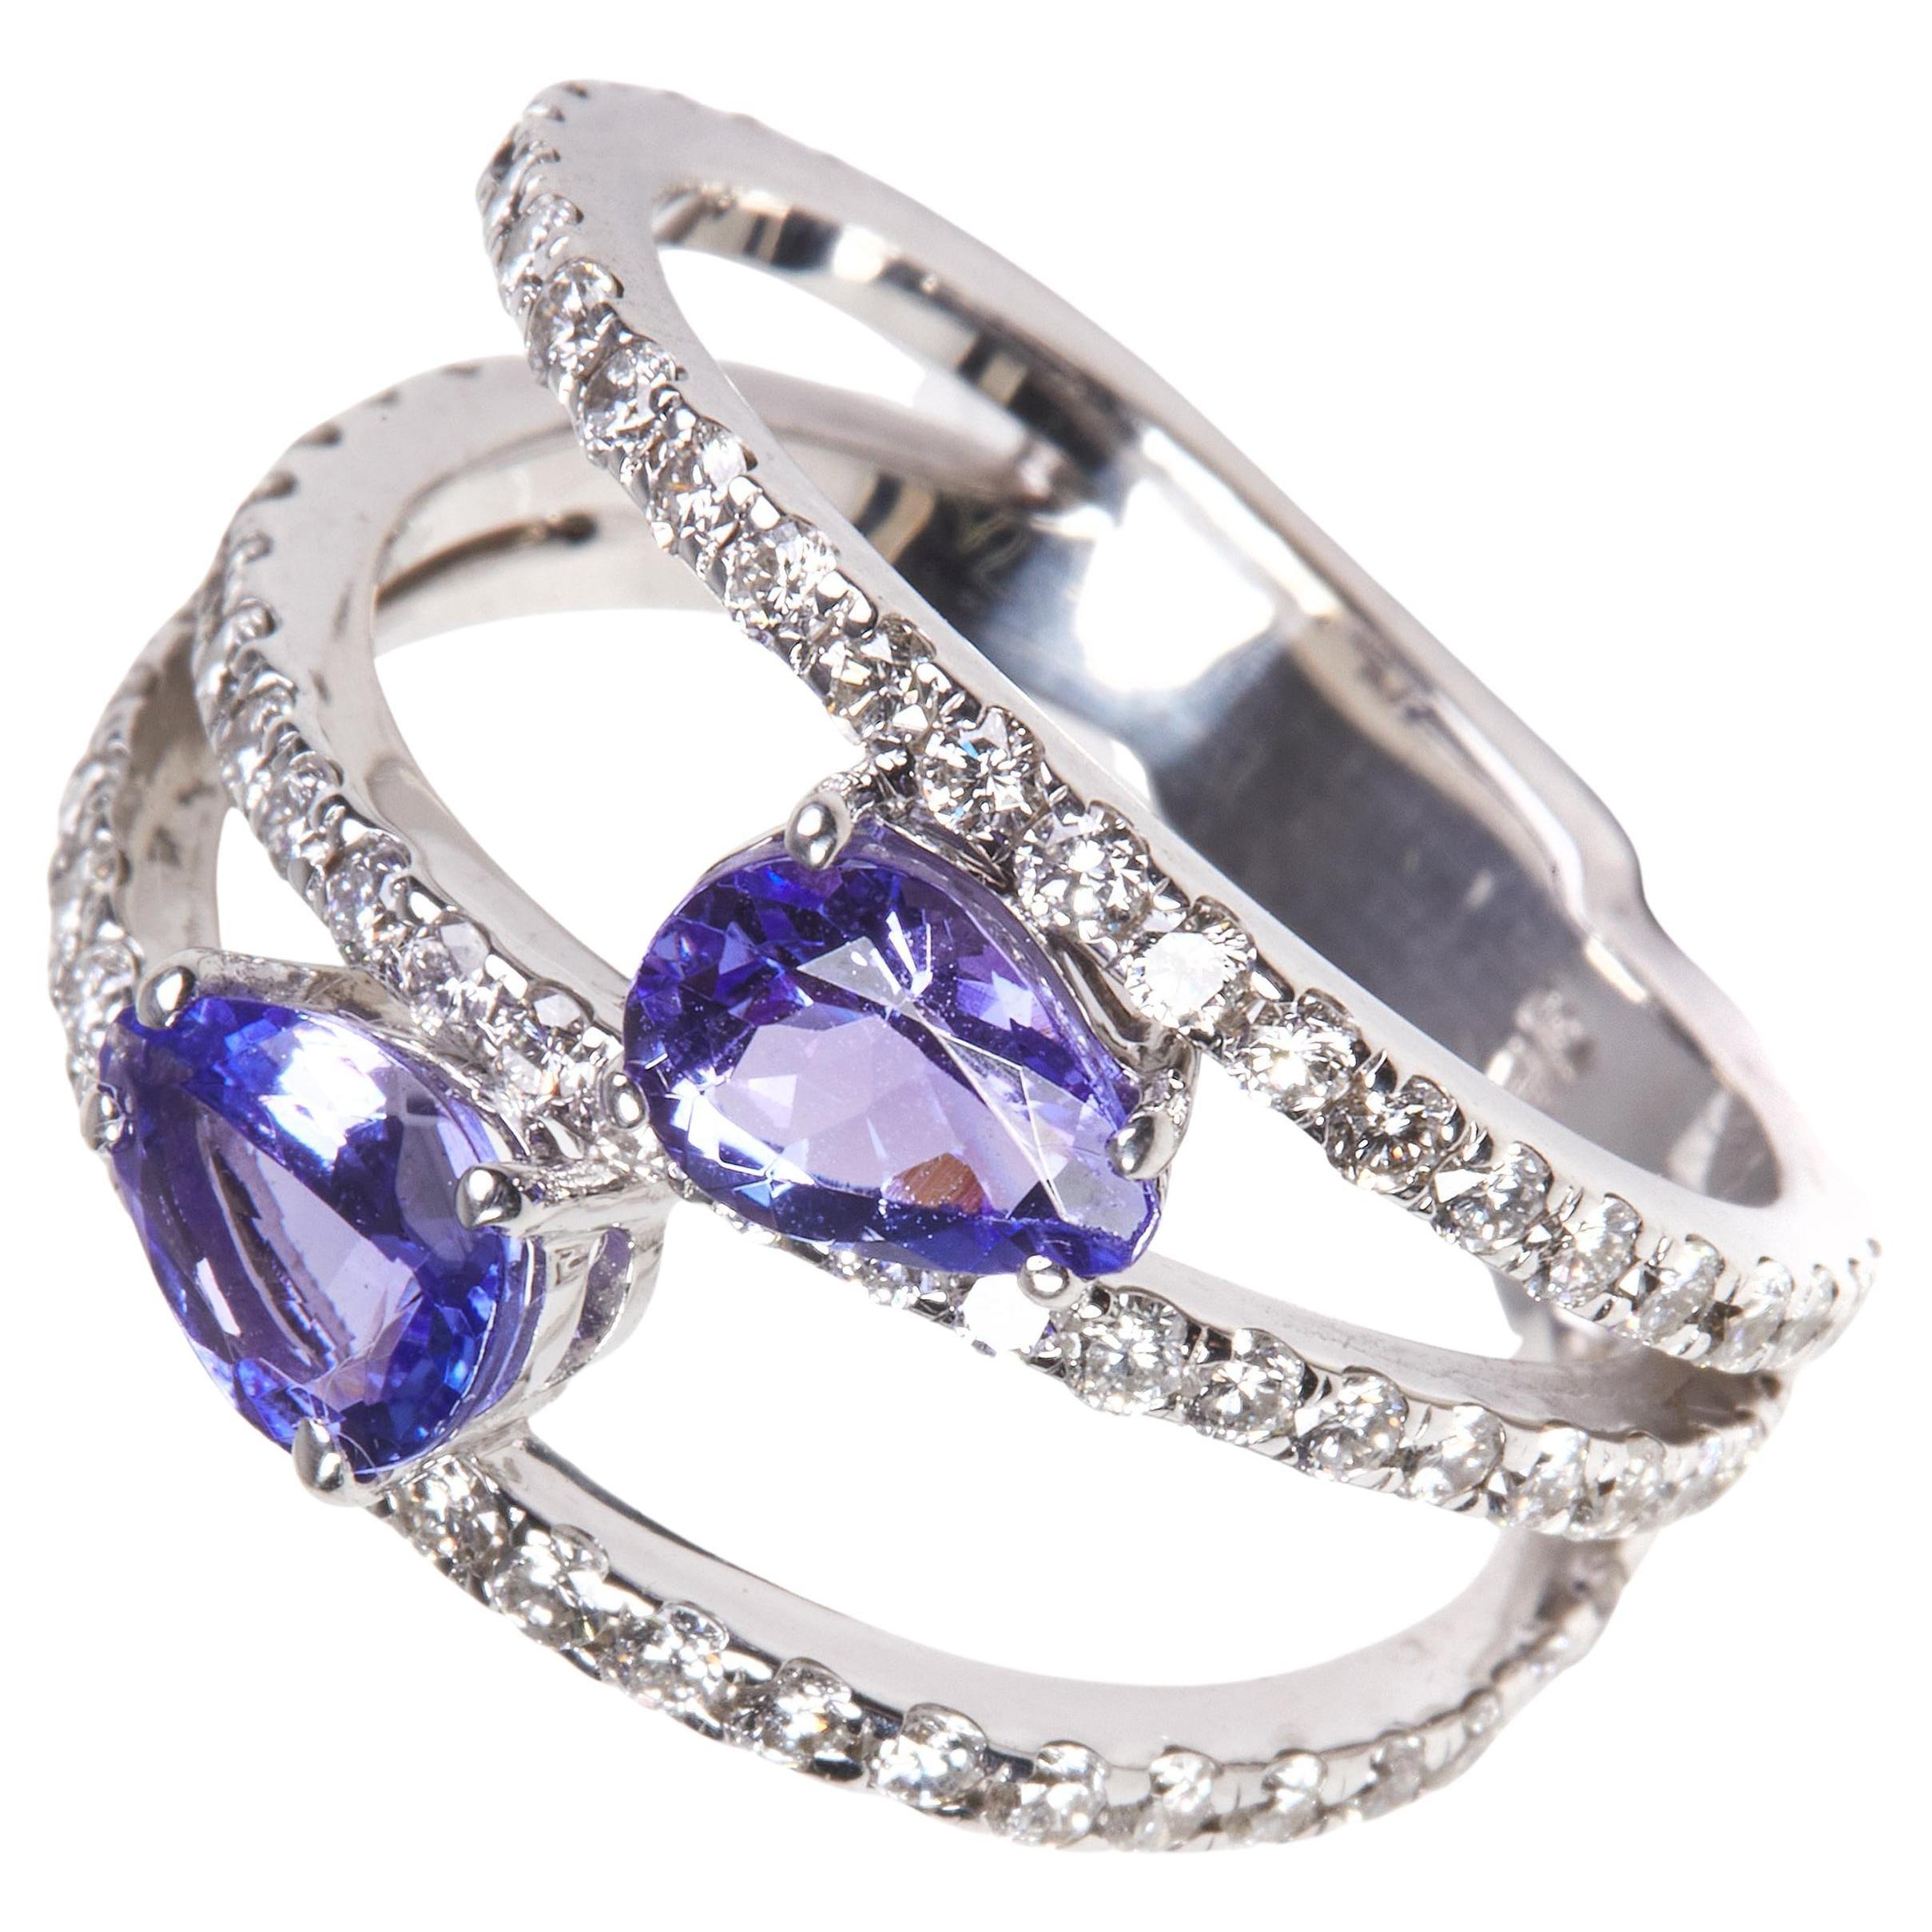 
Beautiful 18 Karat white gold cocktail ring with a stunning 6.50 carat tanzanite center stone. This ring combines classical with modern elements and can be worn every day! 

76  Diamonds 1.11 carat
2 Tanzanite 1.23 carat

Size EU 53.5 US